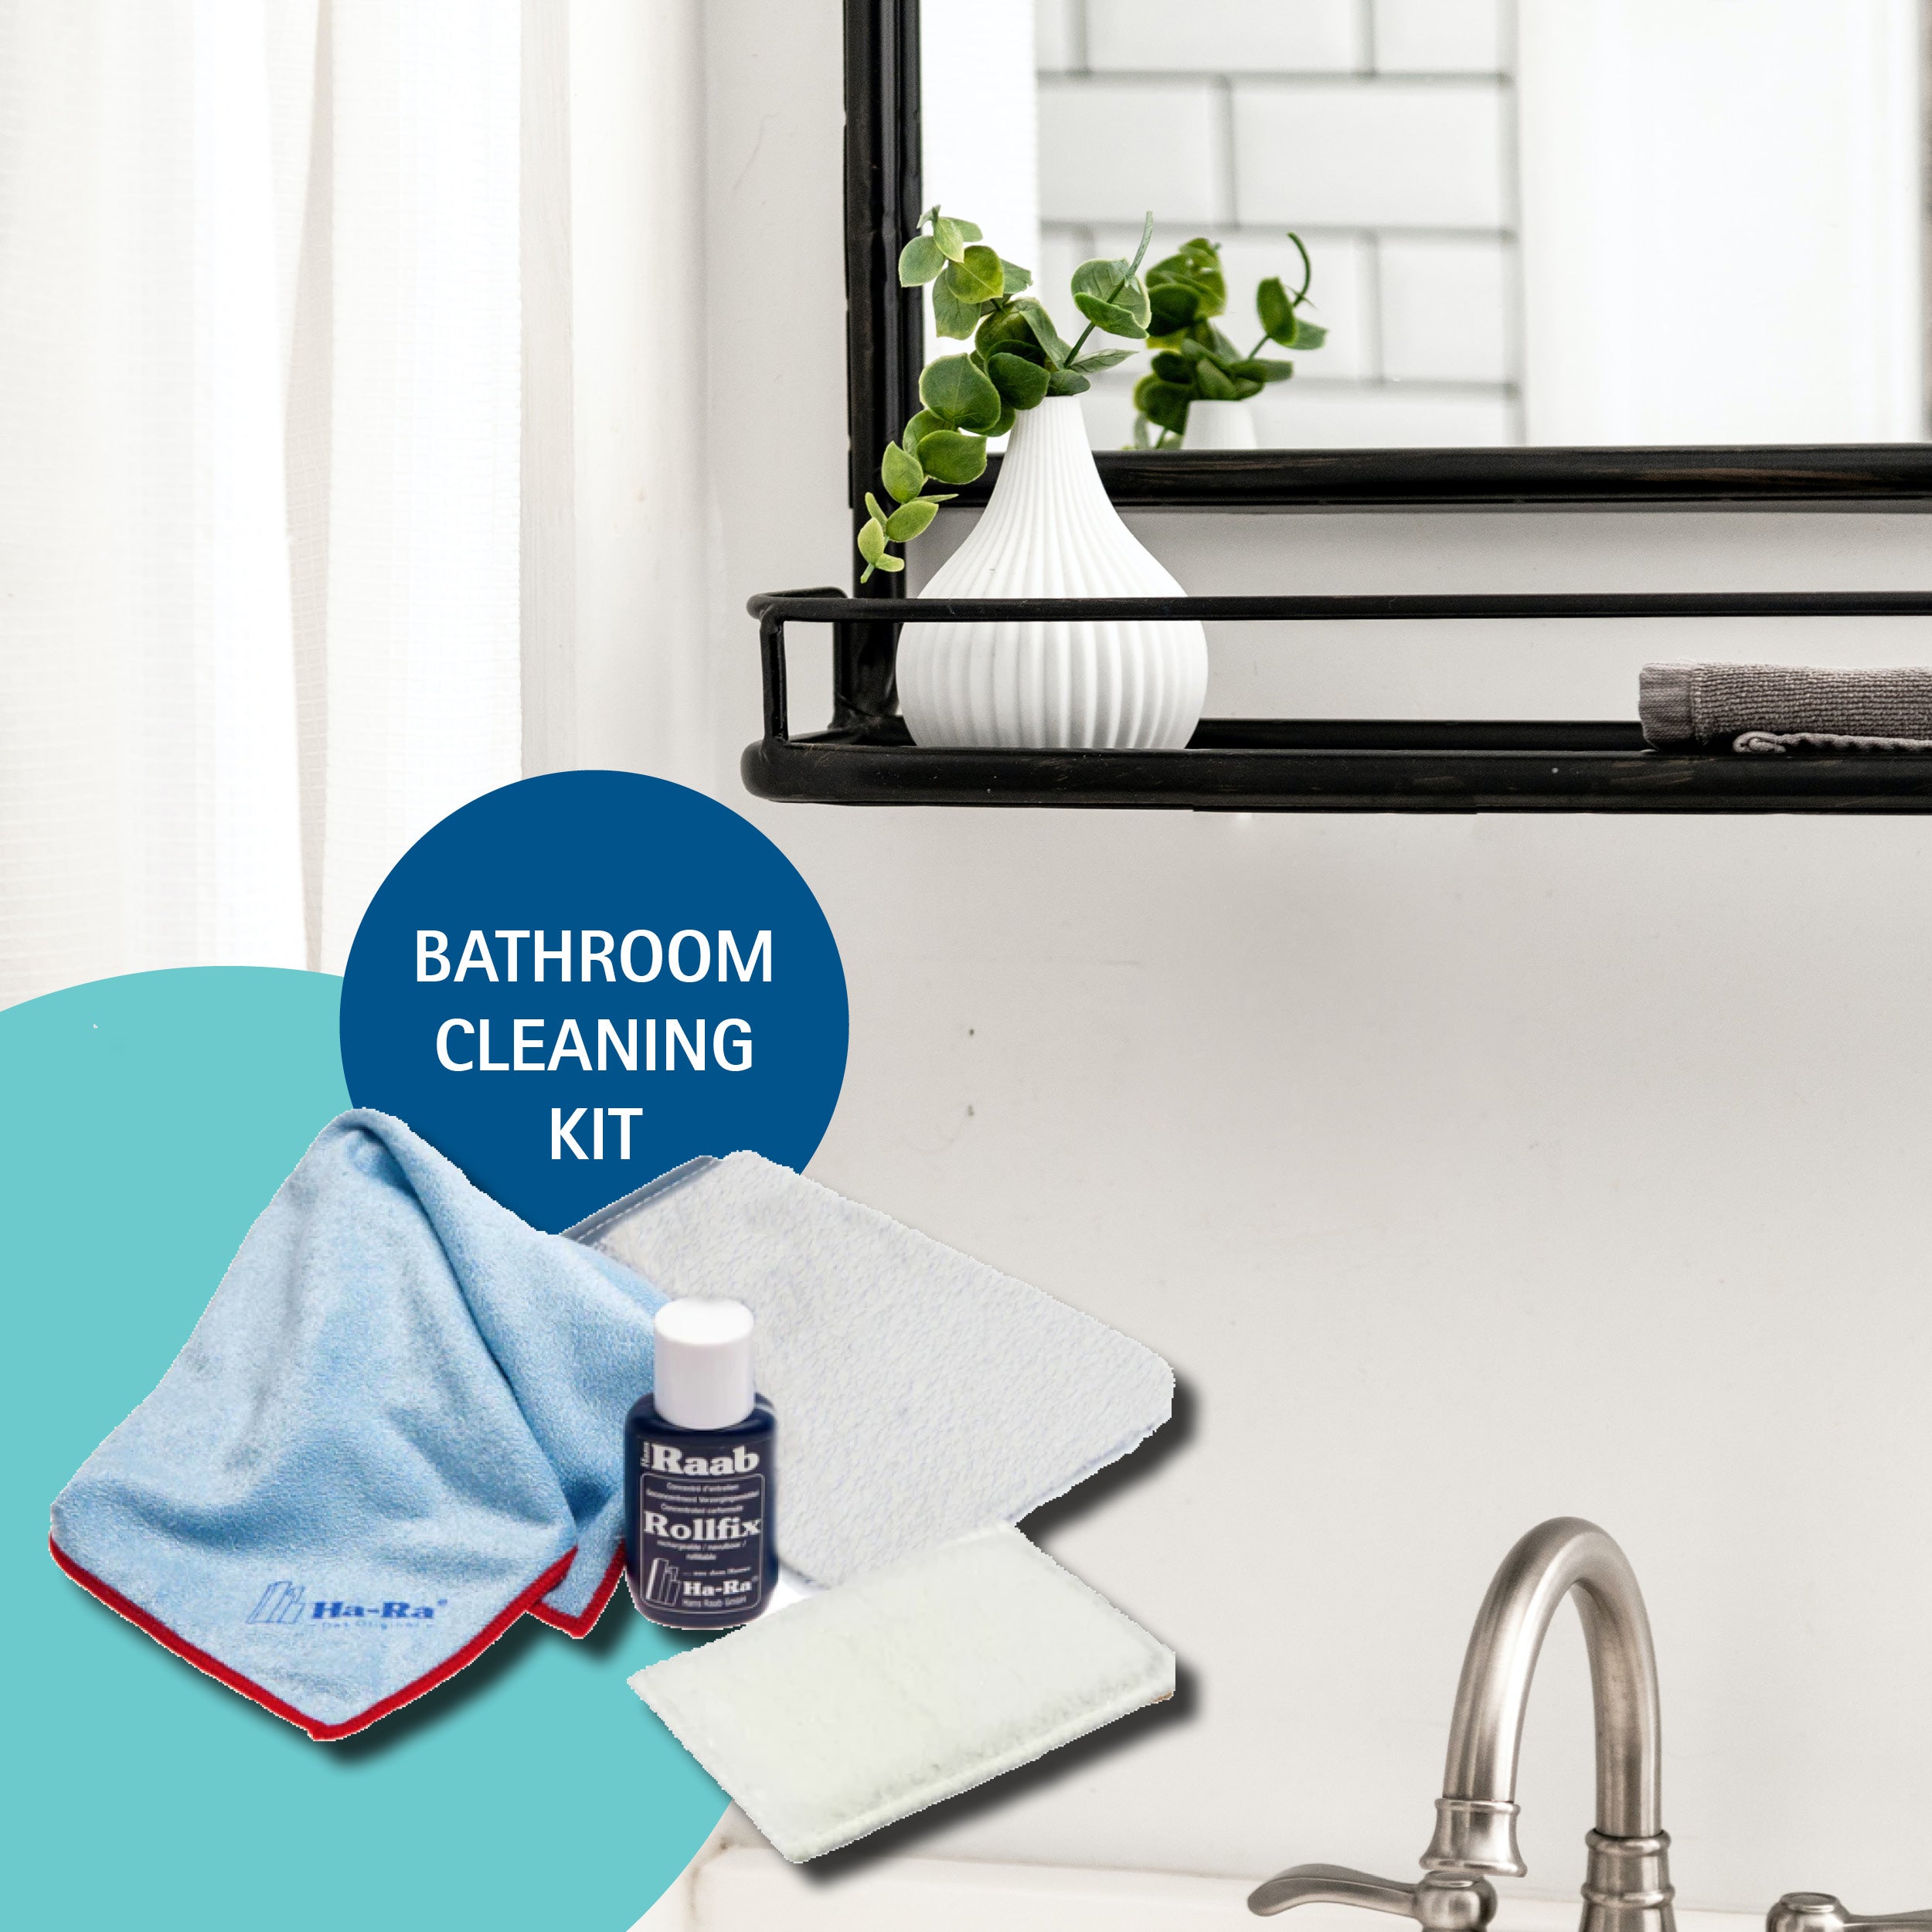 Transform your bathroom, with our sustainable and commercial-grade cleaning kit